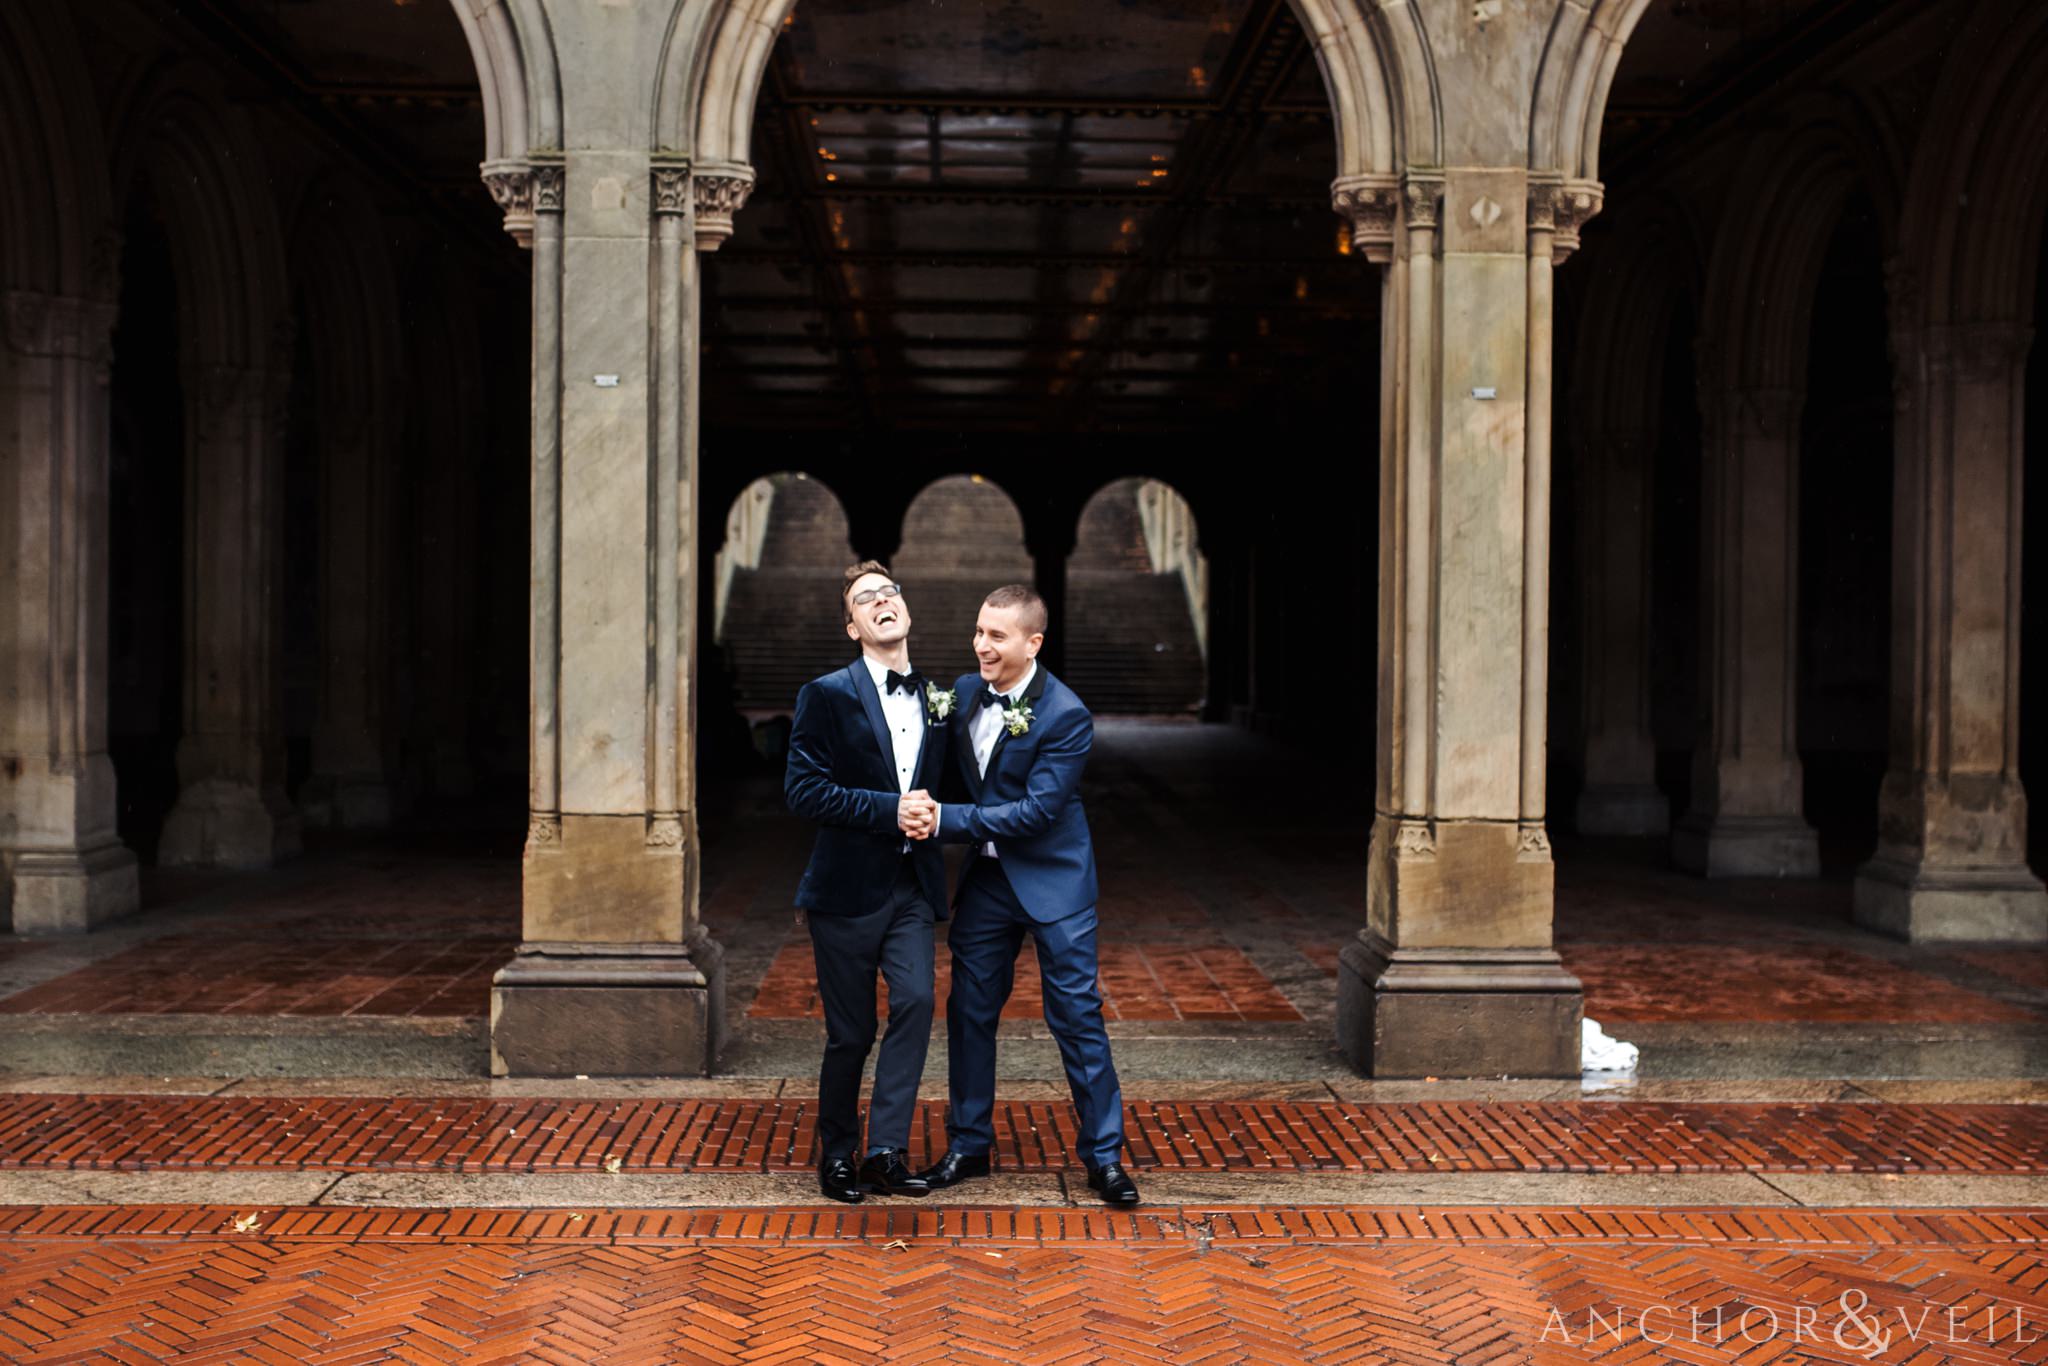 dancing in front of the arches during their central park elopement in bethesda Terrace